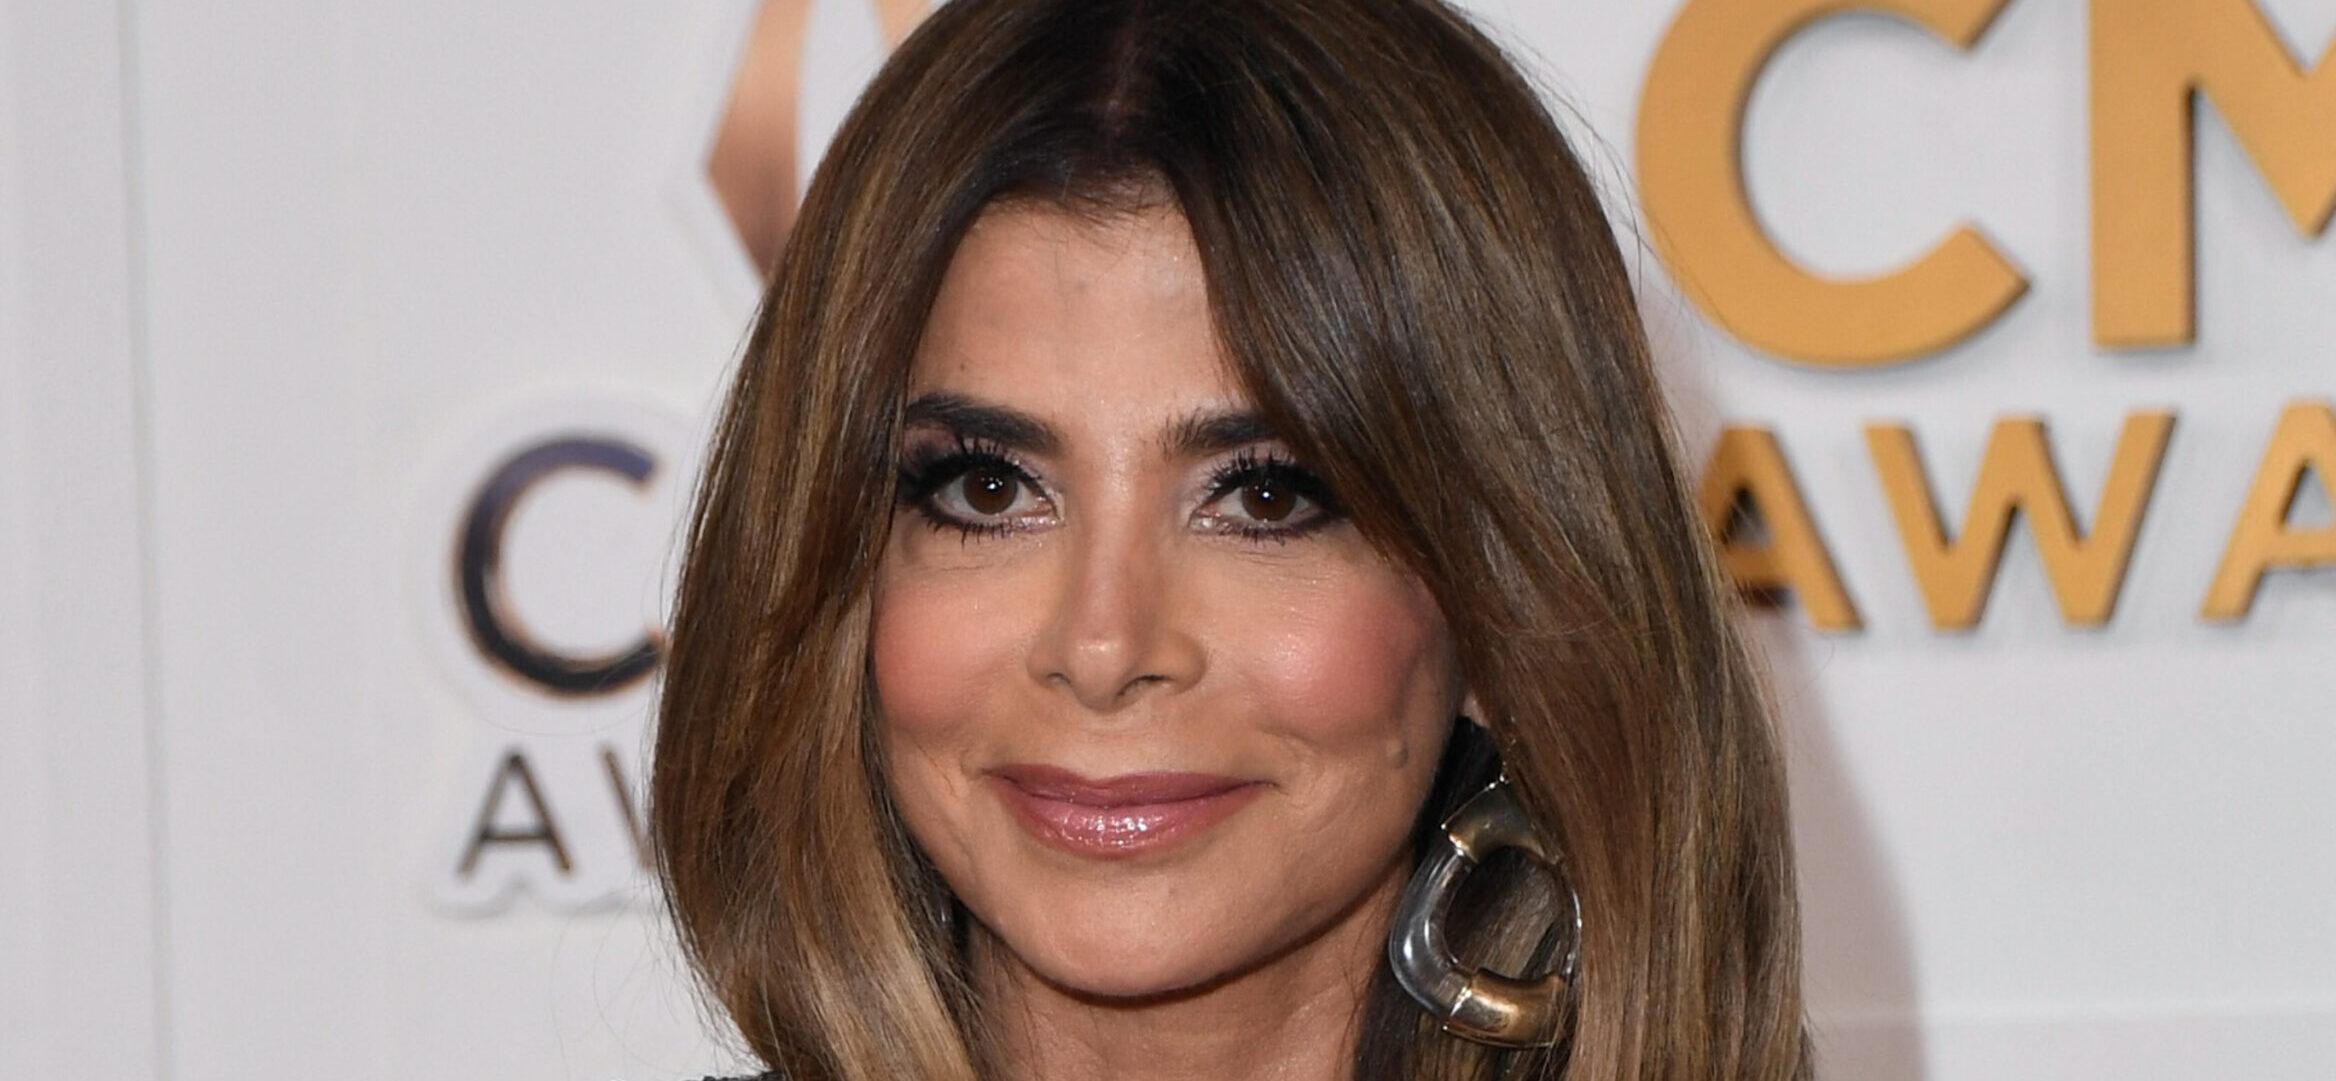 Paula Abdul Seen For First Time Since Bombshell Nigel Lythgoe Accusations